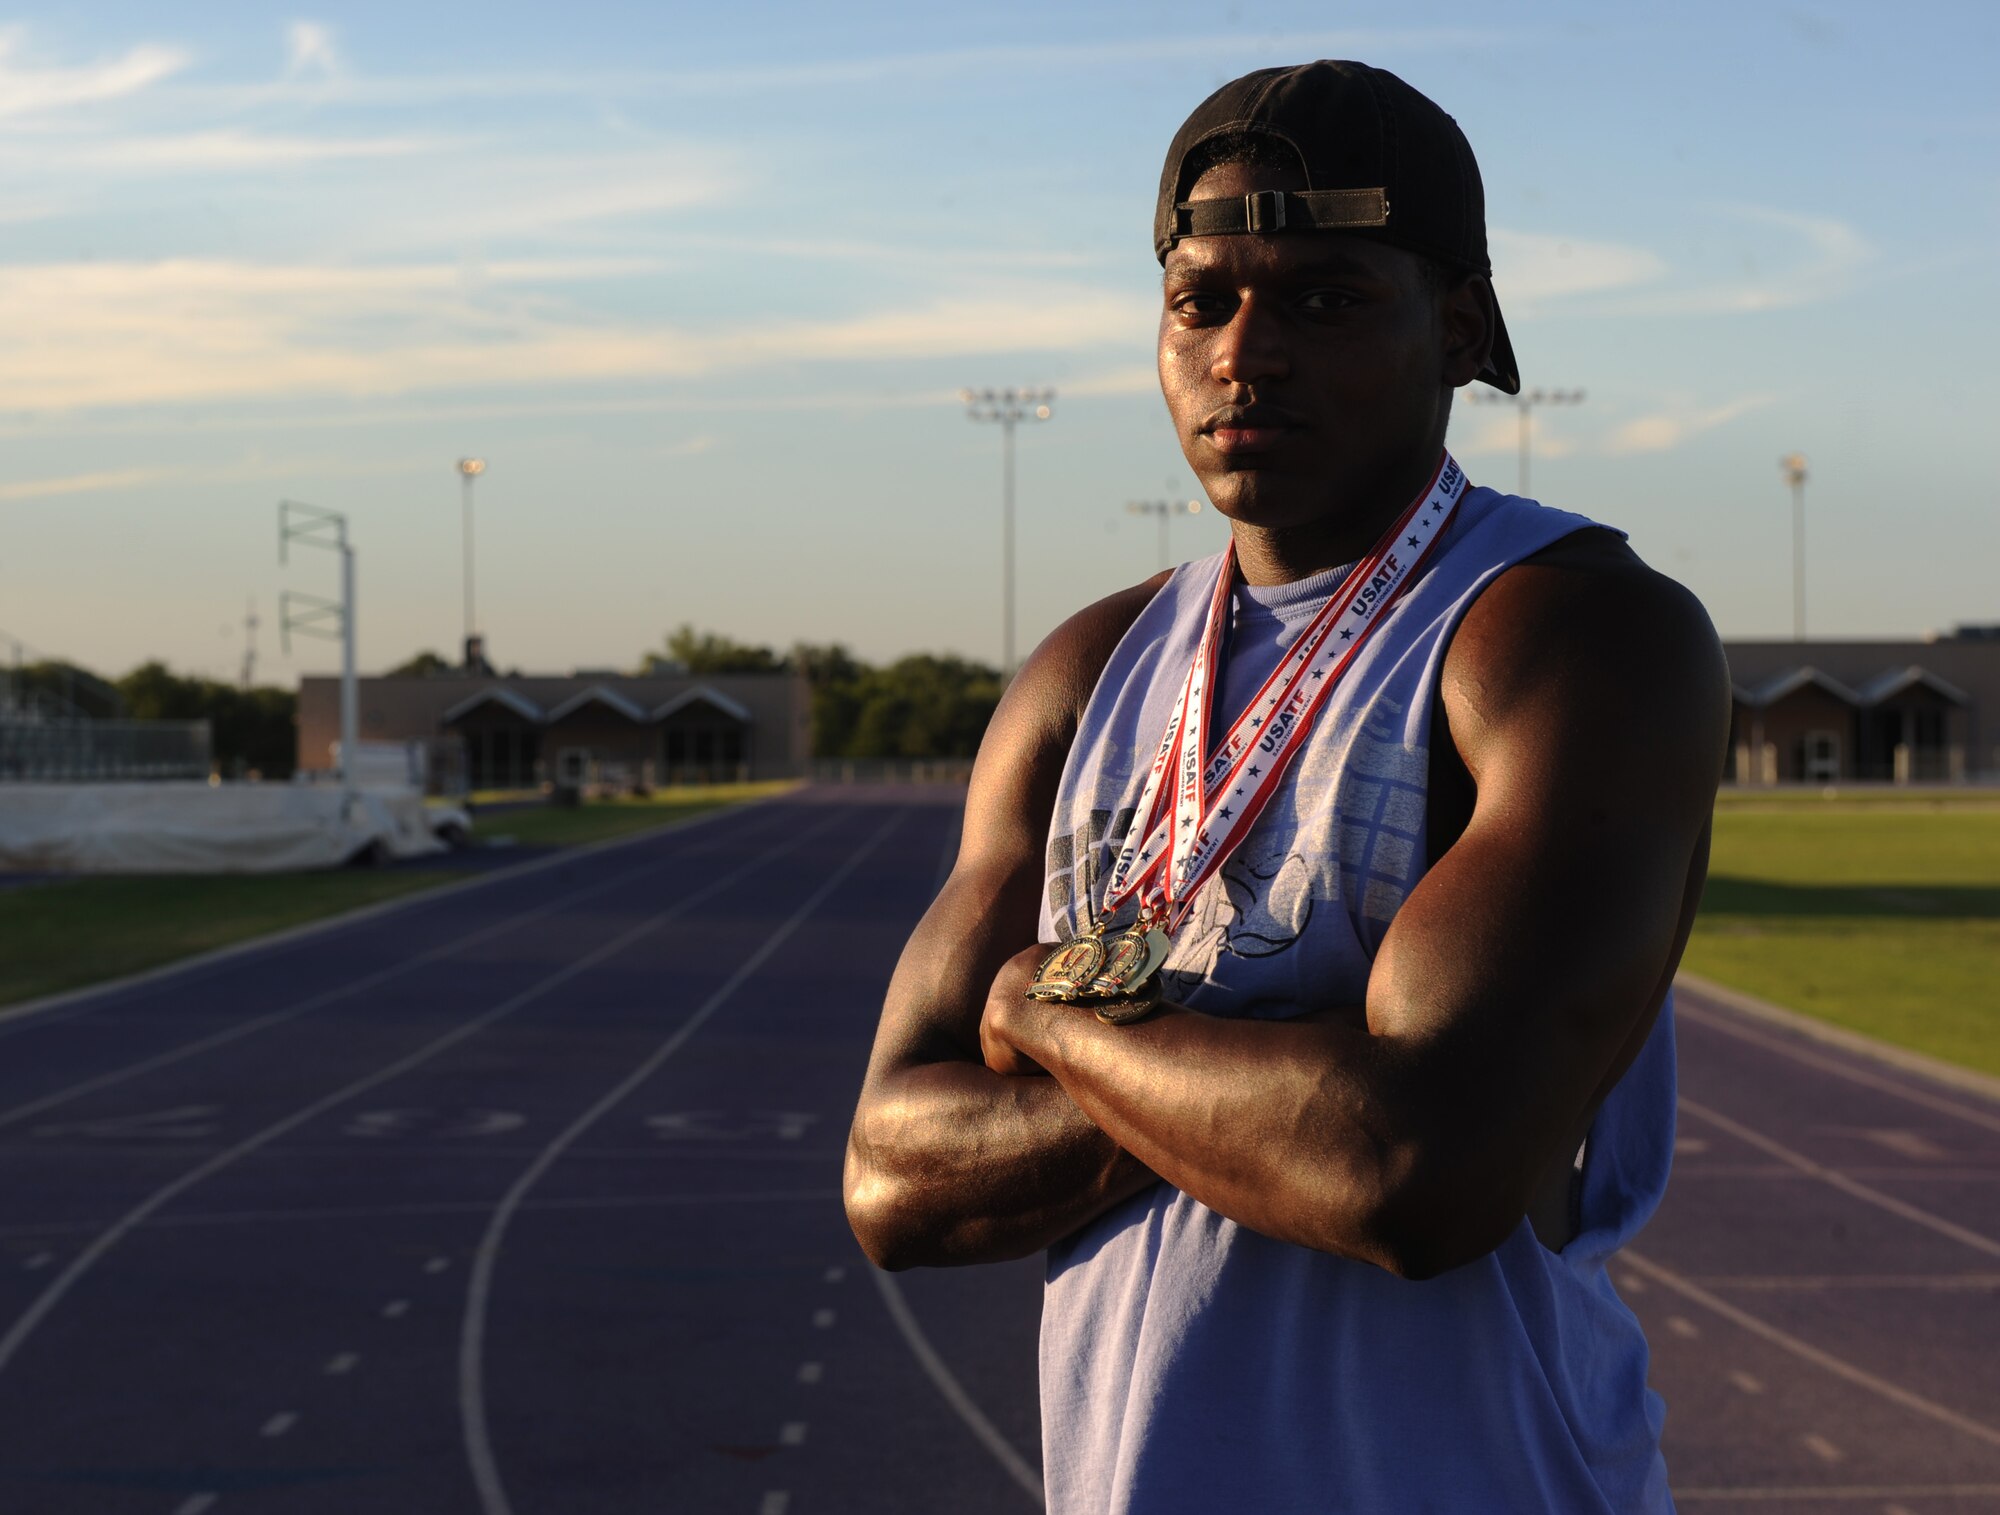 U.S. Air Force Senior Airman Parnelle Shands, 317th Aircraft Maintenance Squadron crew chief, wears medals won from previous track and field events at Abilene Christian University, Texas, July 14, 2017. Shands participated in several events with the U.S. Air Force Track and Field team such as long jump, 100-meter dash and a 4x100 relay. (U.S. Air Force photo by Airman Kylee Thomas)